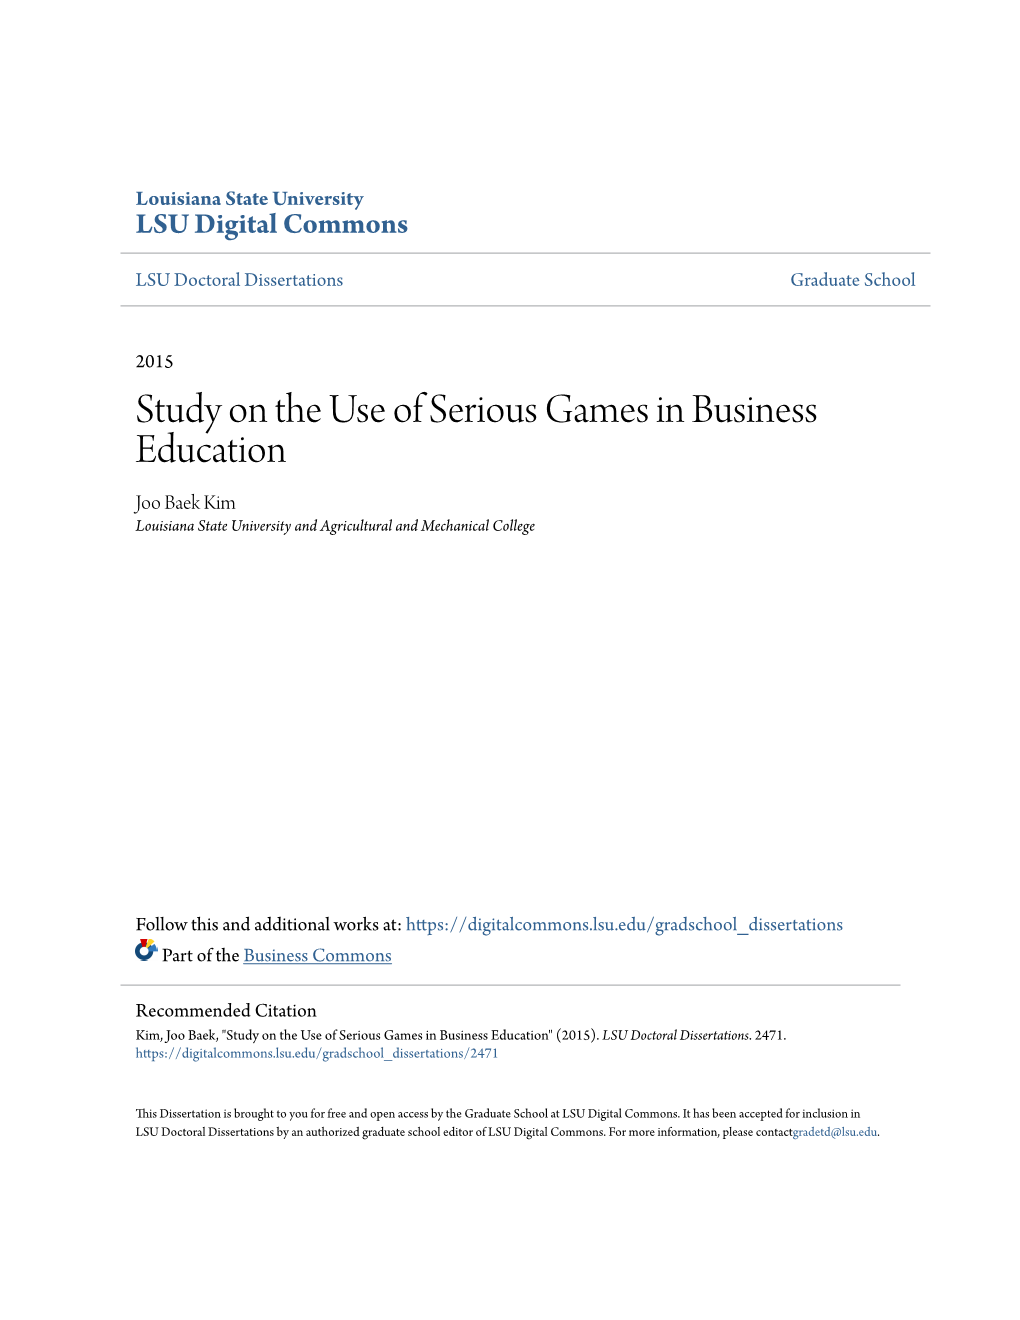 Study on the Use of Serious Games in Business Education Joo Baek Kim Louisiana State University and Agricultural and Mechanical College